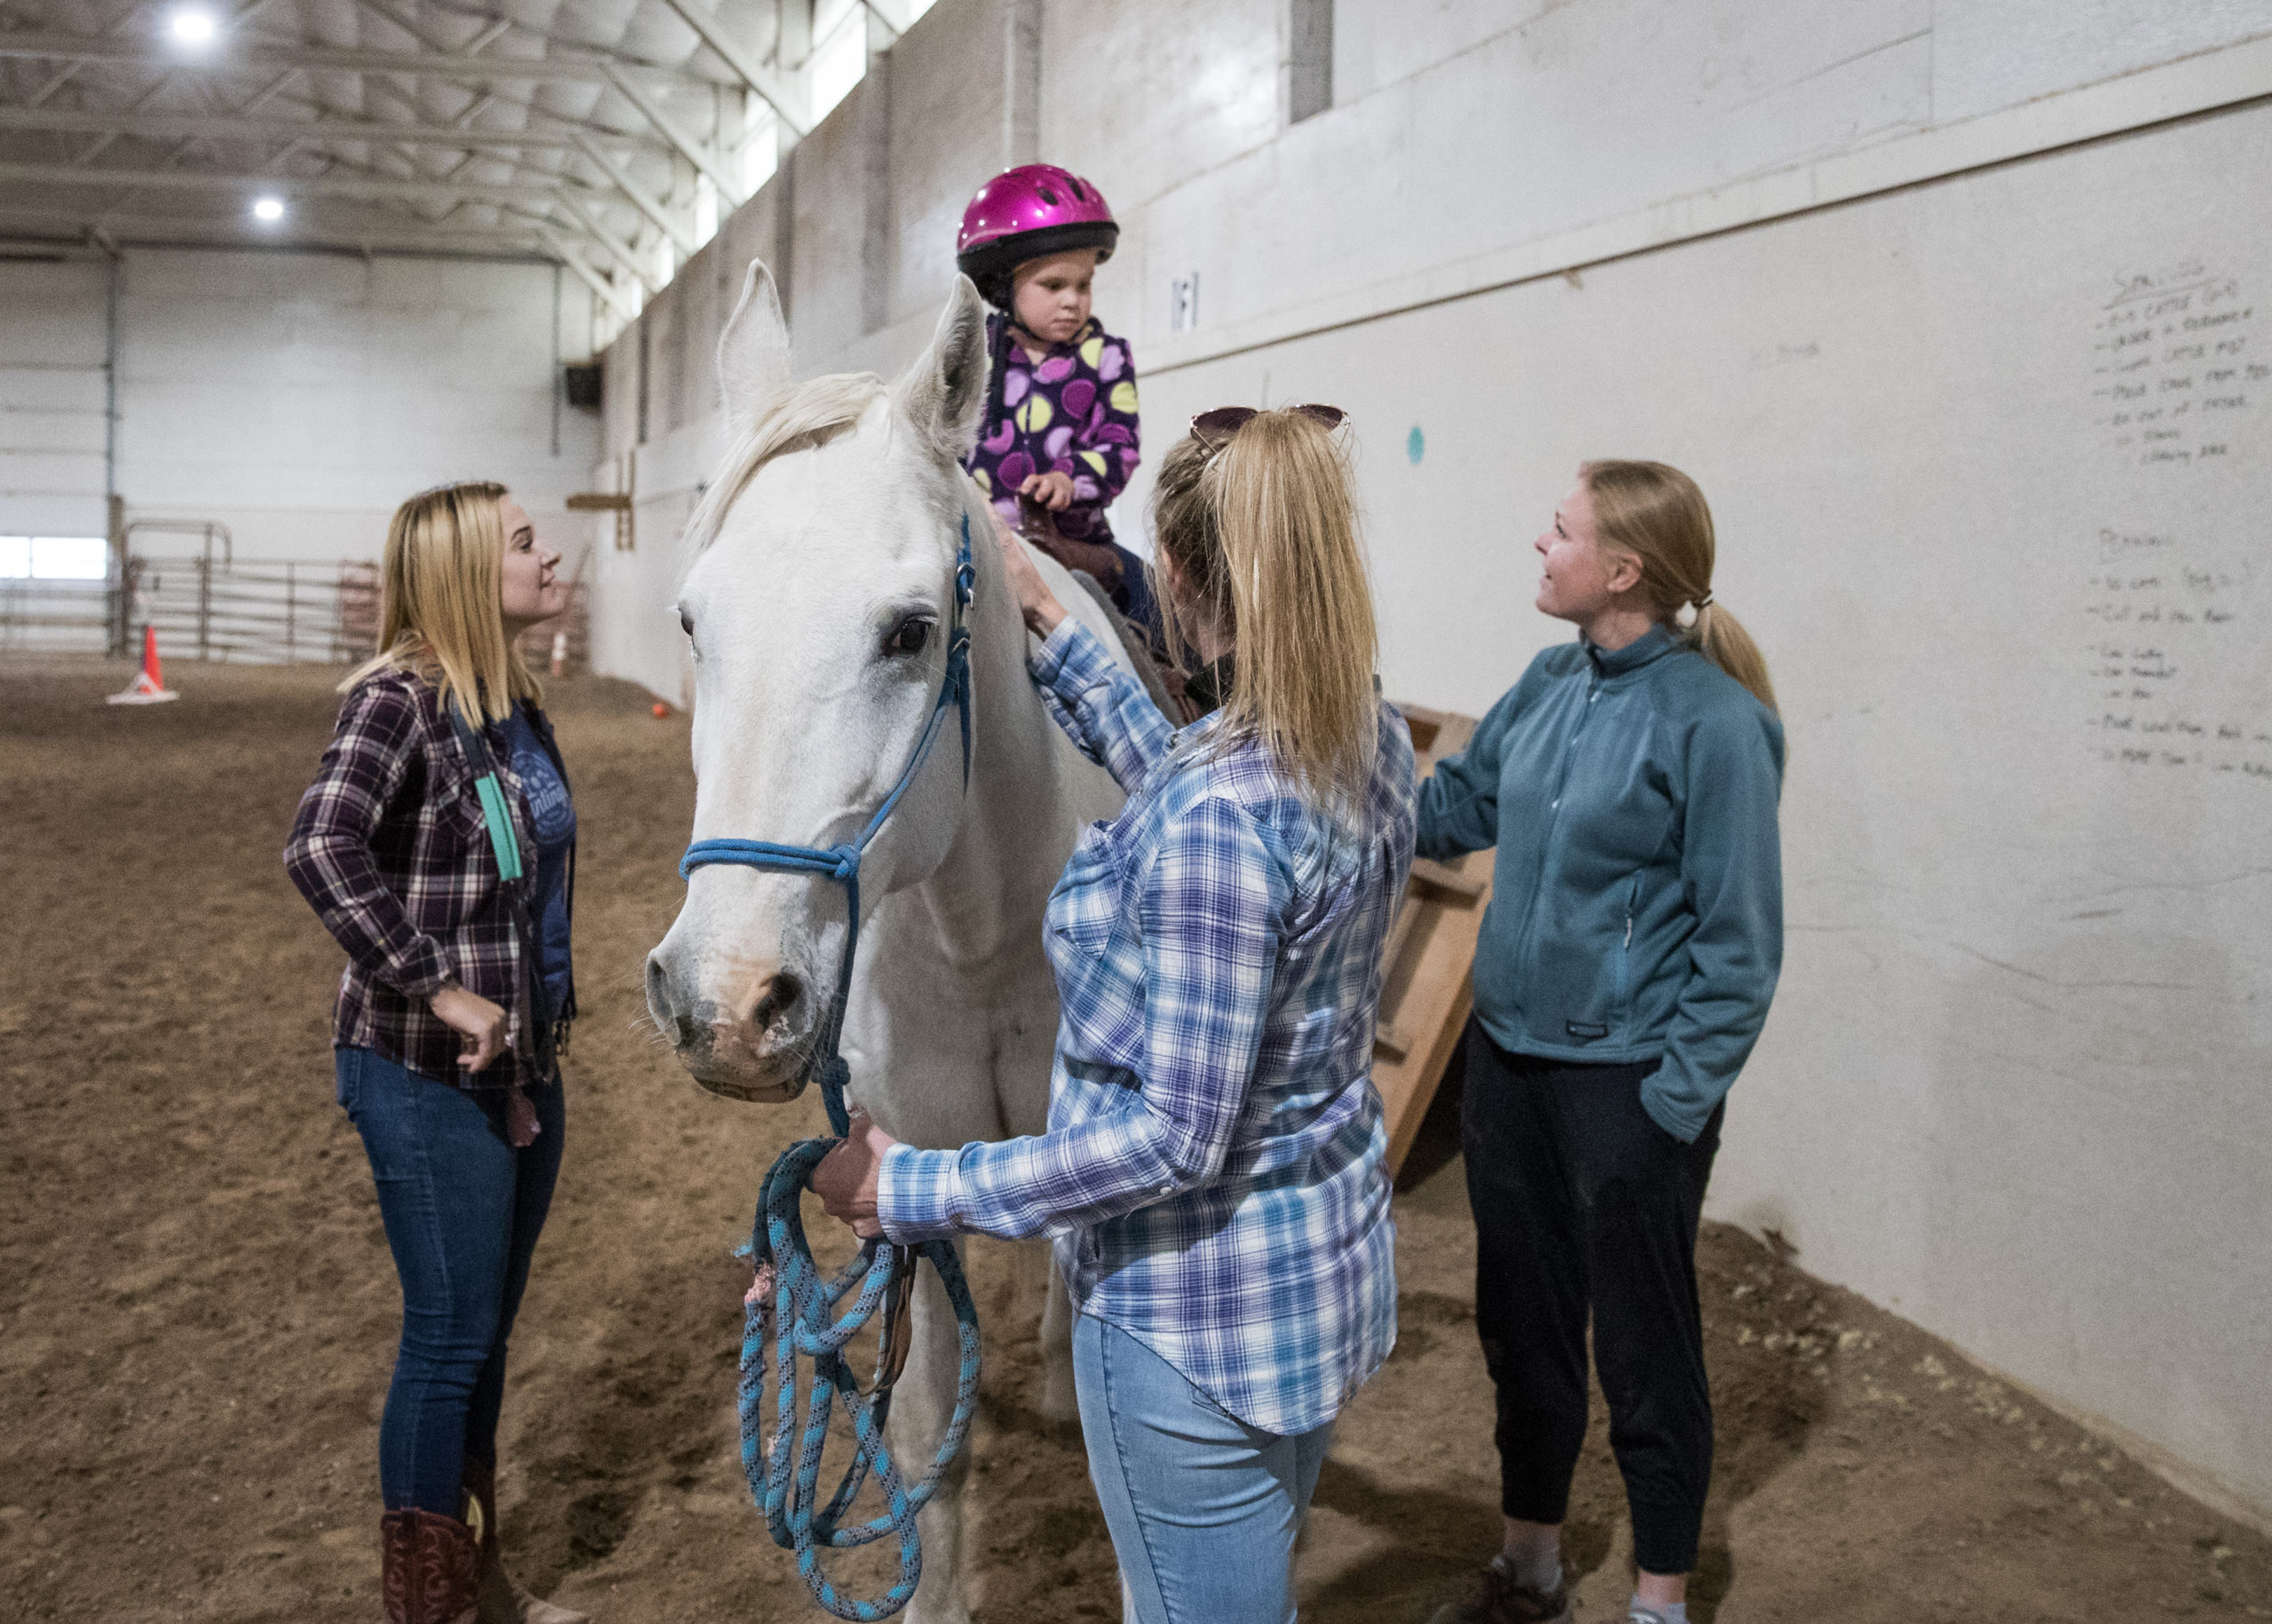 Erica Sandiland (right) helps her daughter, Hazel Guerette, as she gets on her lesson horse of the day. Guerette, 4, is participating in an “equine-assisted activity” session at Trotting Horse Therapeutic Riding, where she works to improve her core strength and motor skills.